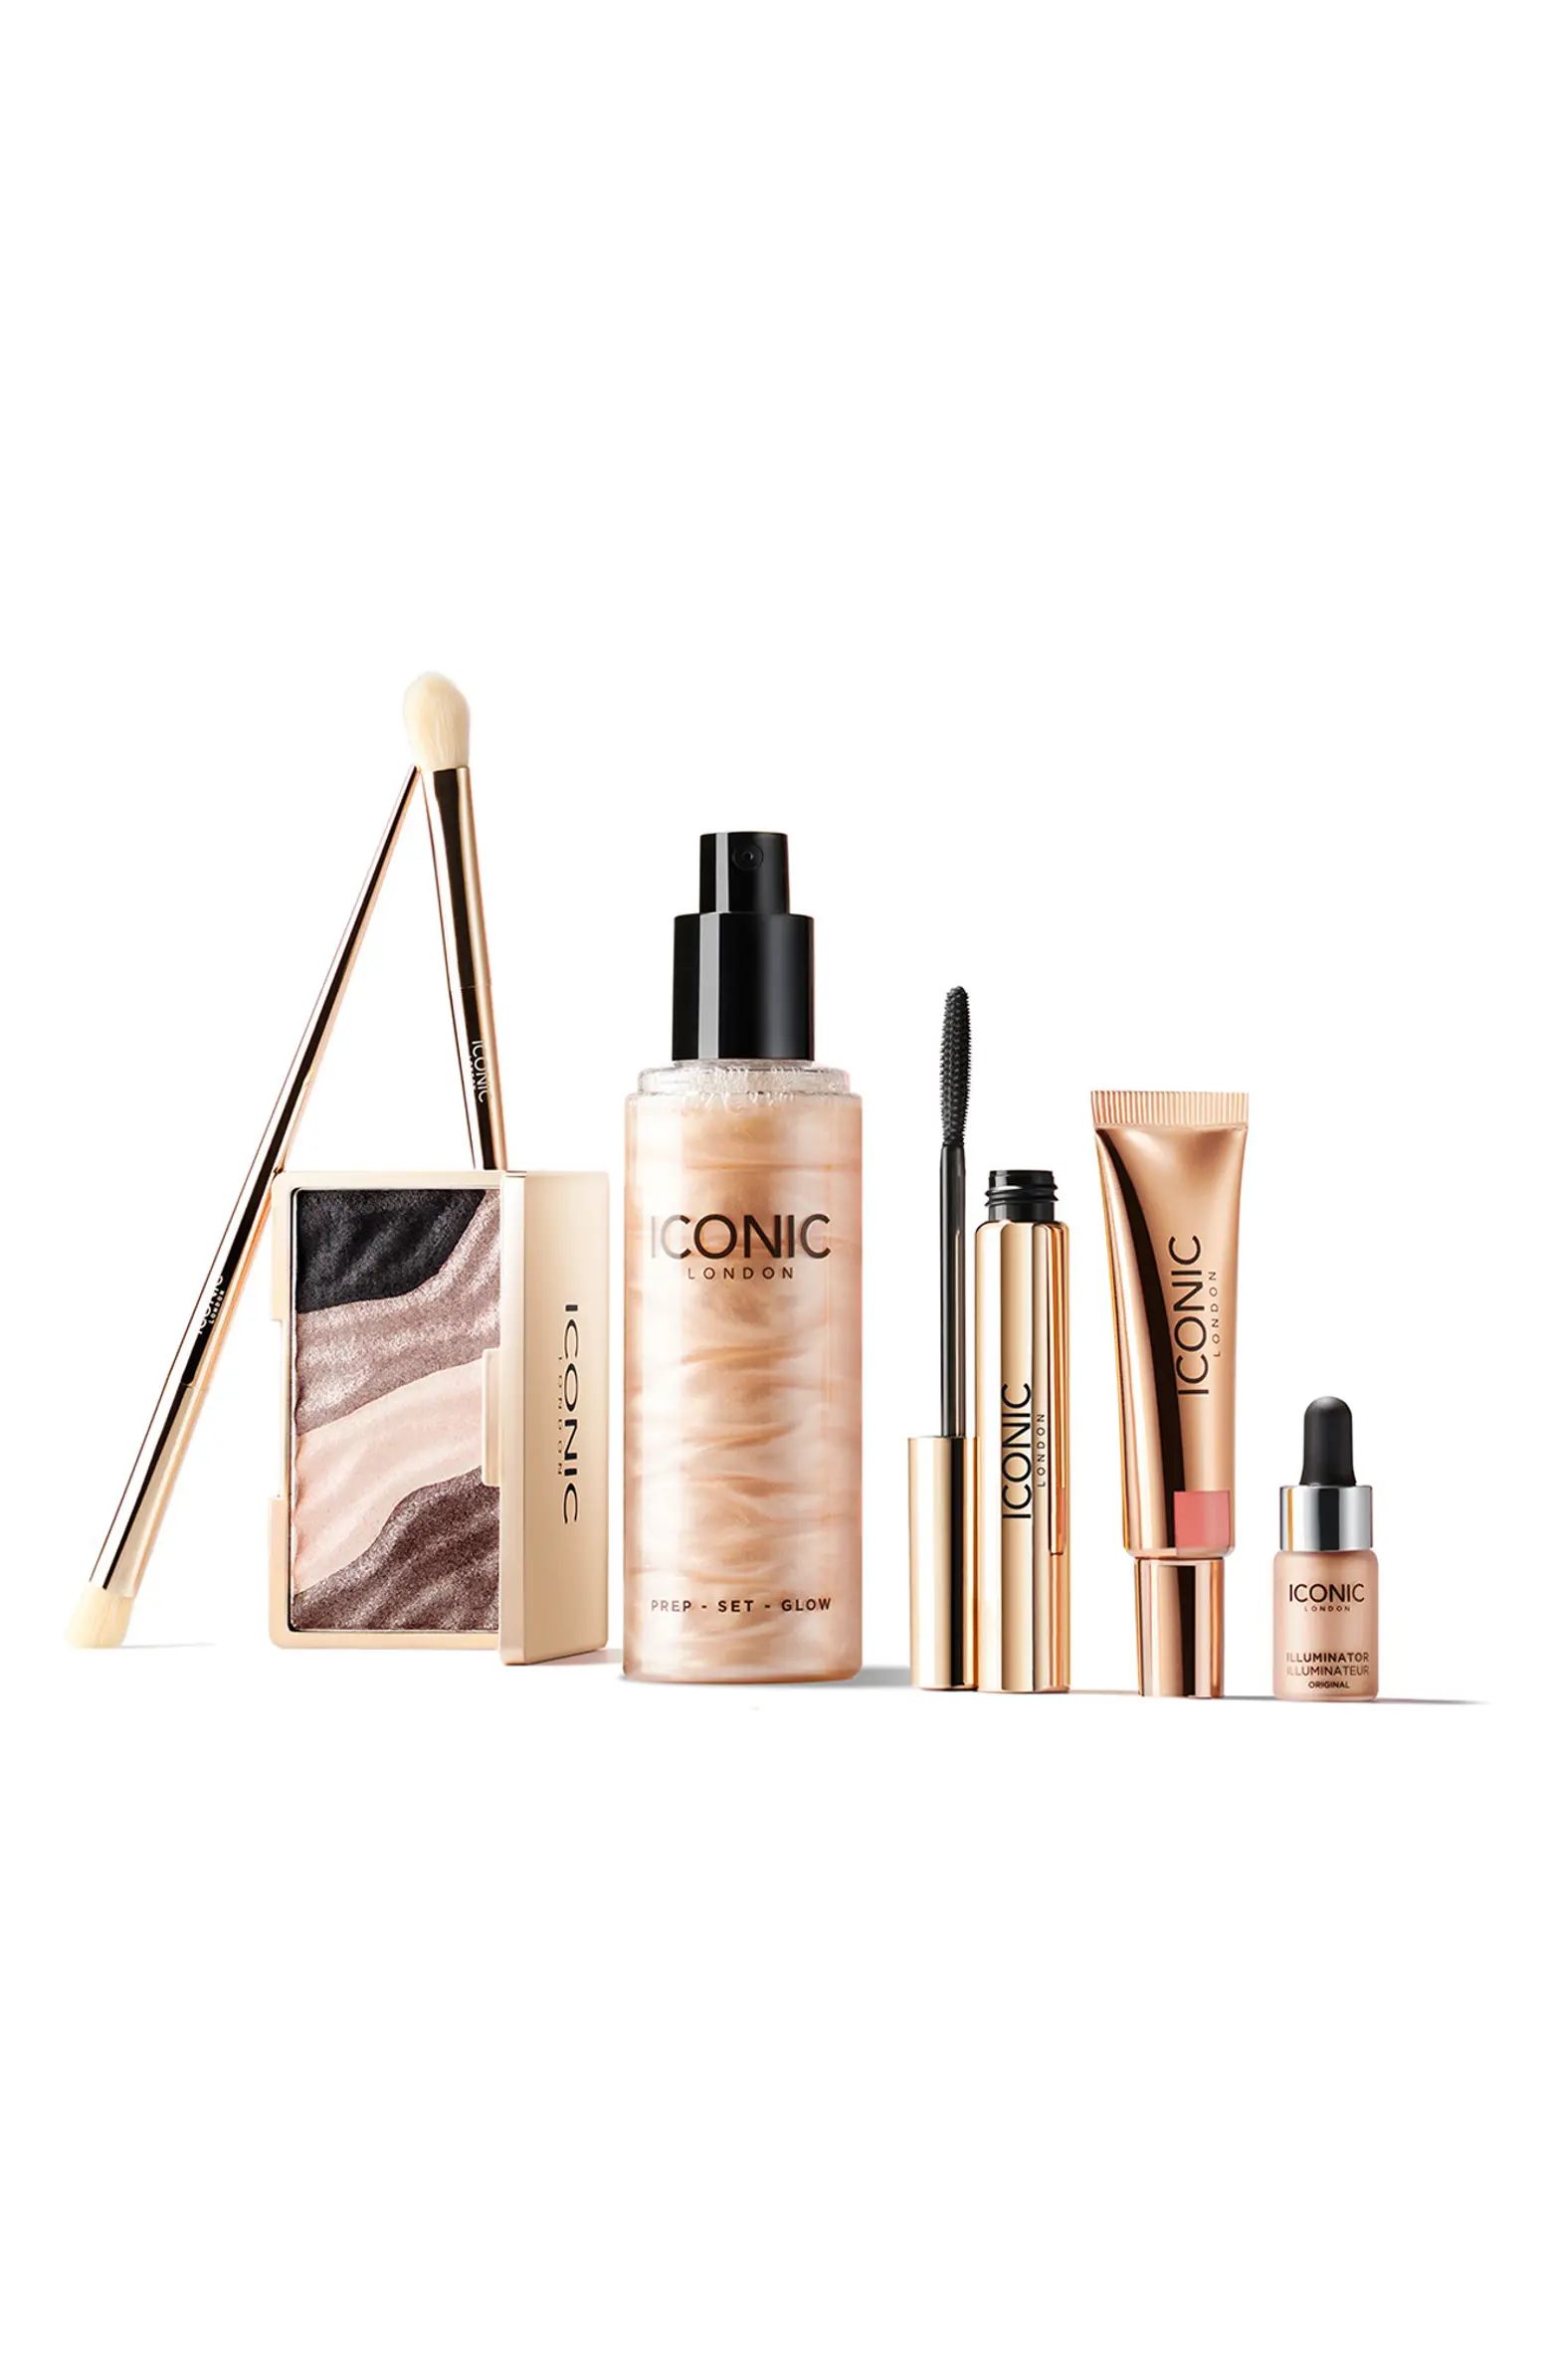 ICONIC LONDON Glowing Out Out Gift Set $156 Value | Nordstrom | Nordstrom